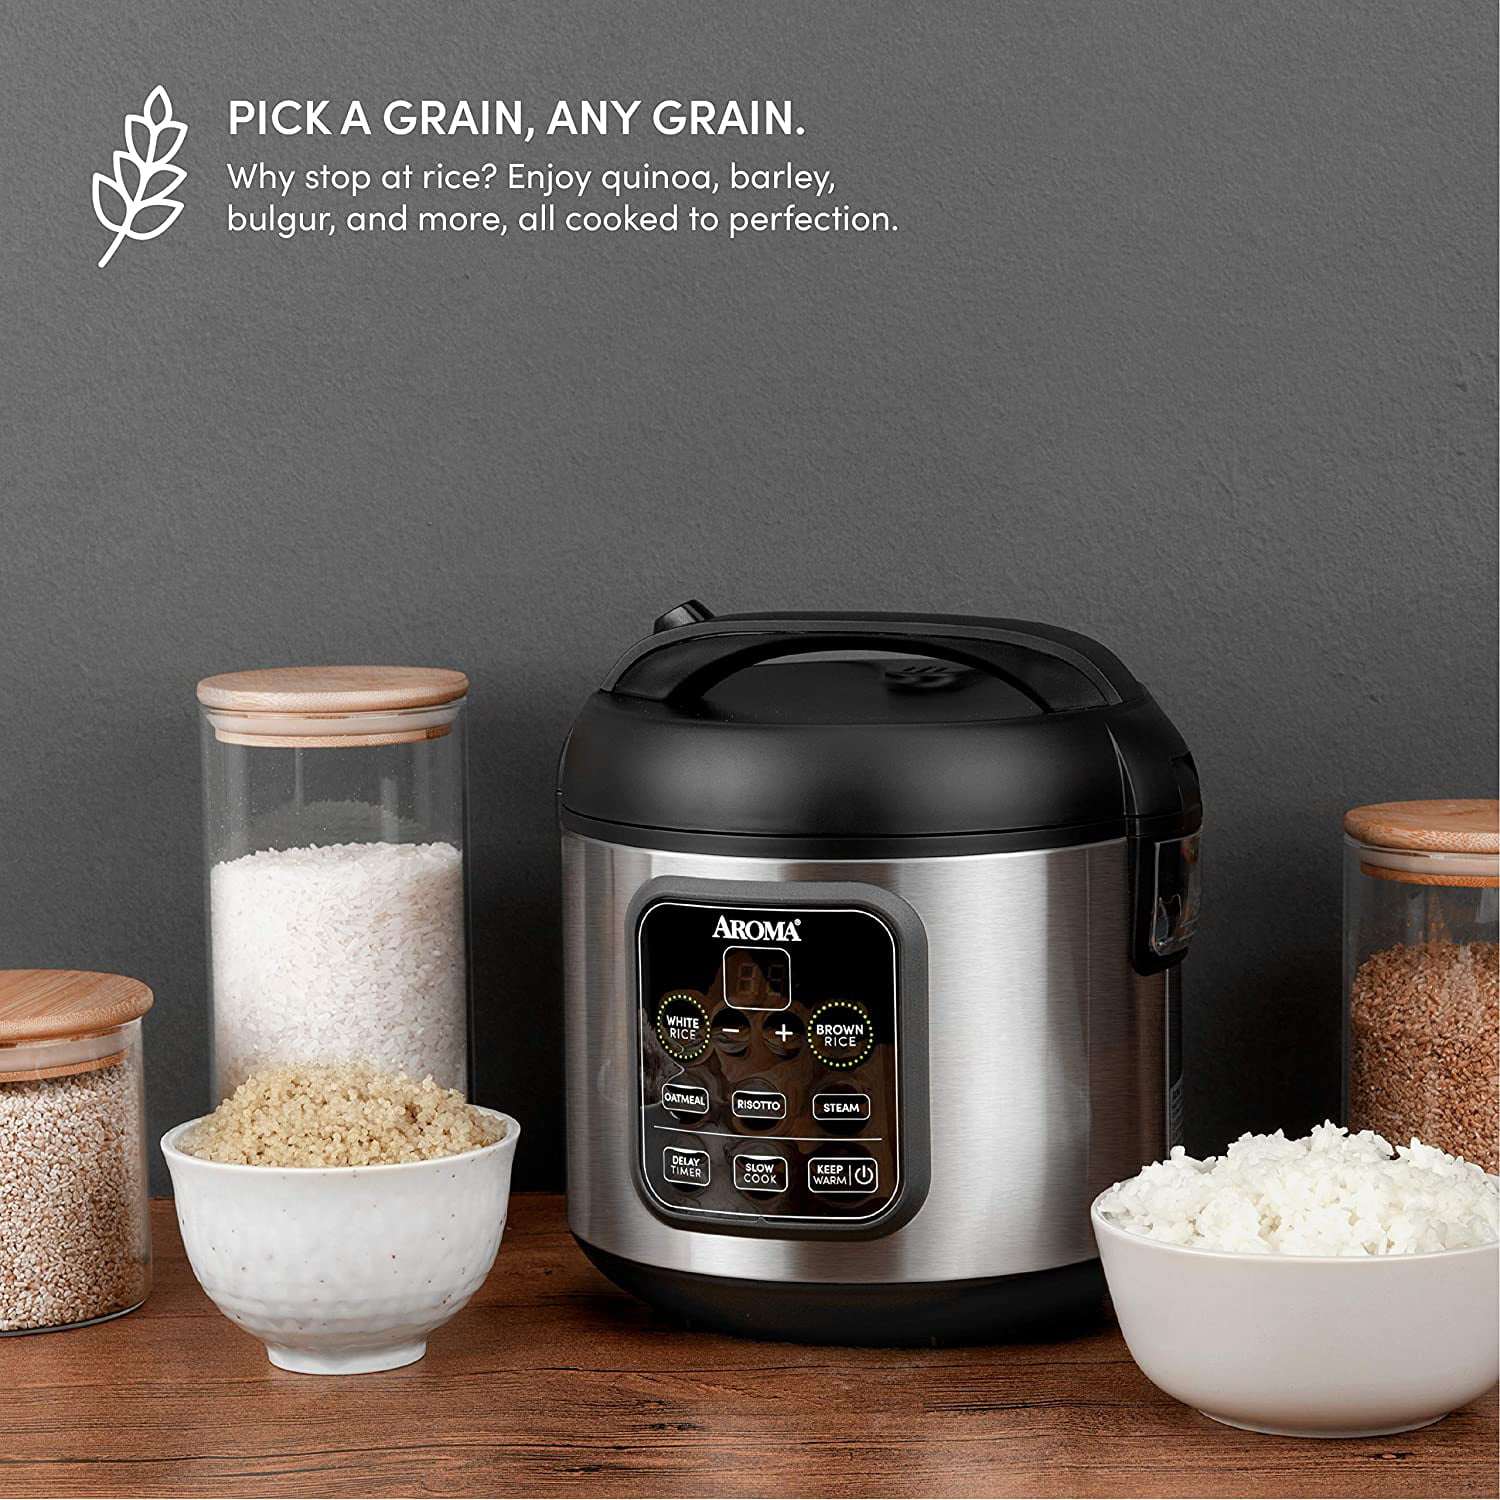 Aroma Housewares Arc-994sb 2o2o Model Rice & Grain Cooker Slow Cook, Steam, Oatmeal, Risotto, 8-Cup Cooked / 4-Cup Uncooked